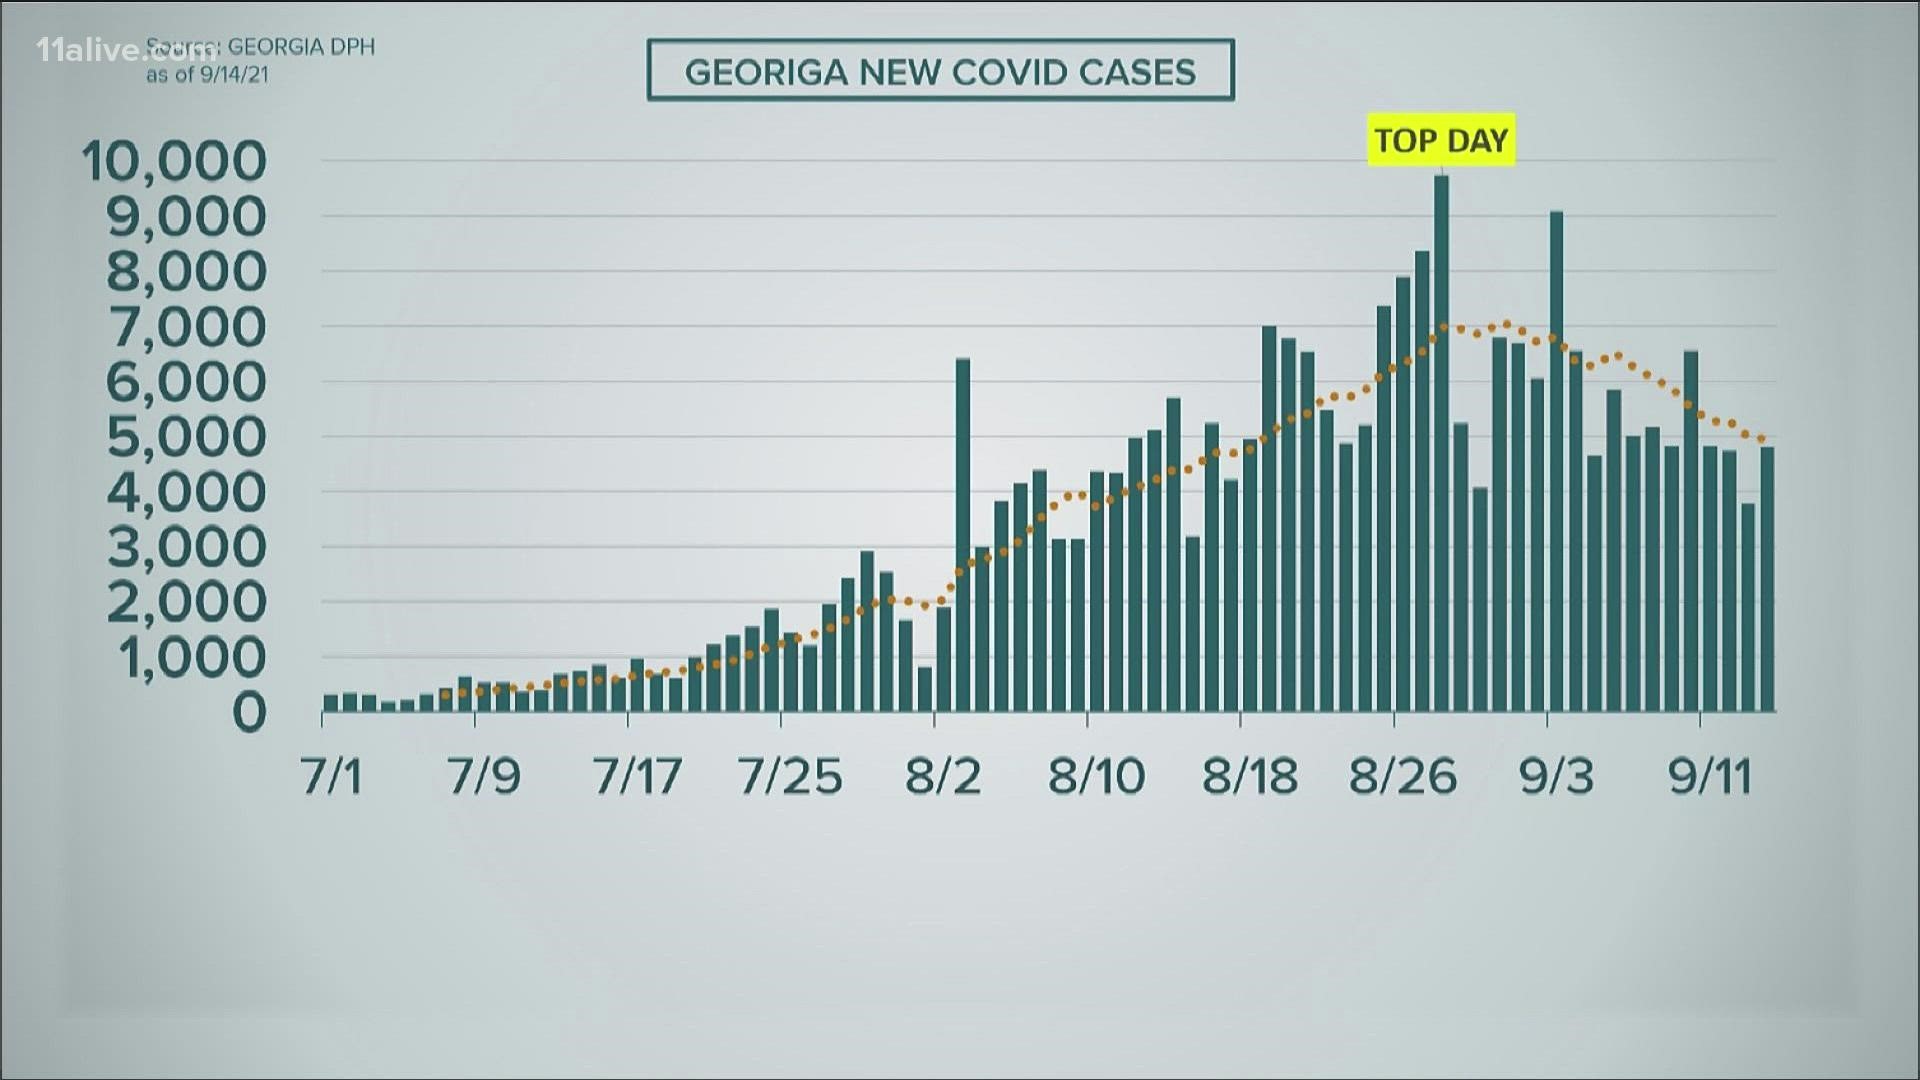 After nearly six weeks of exponential increases, it looks like GA is finally starting to see COVID cases start to decline.